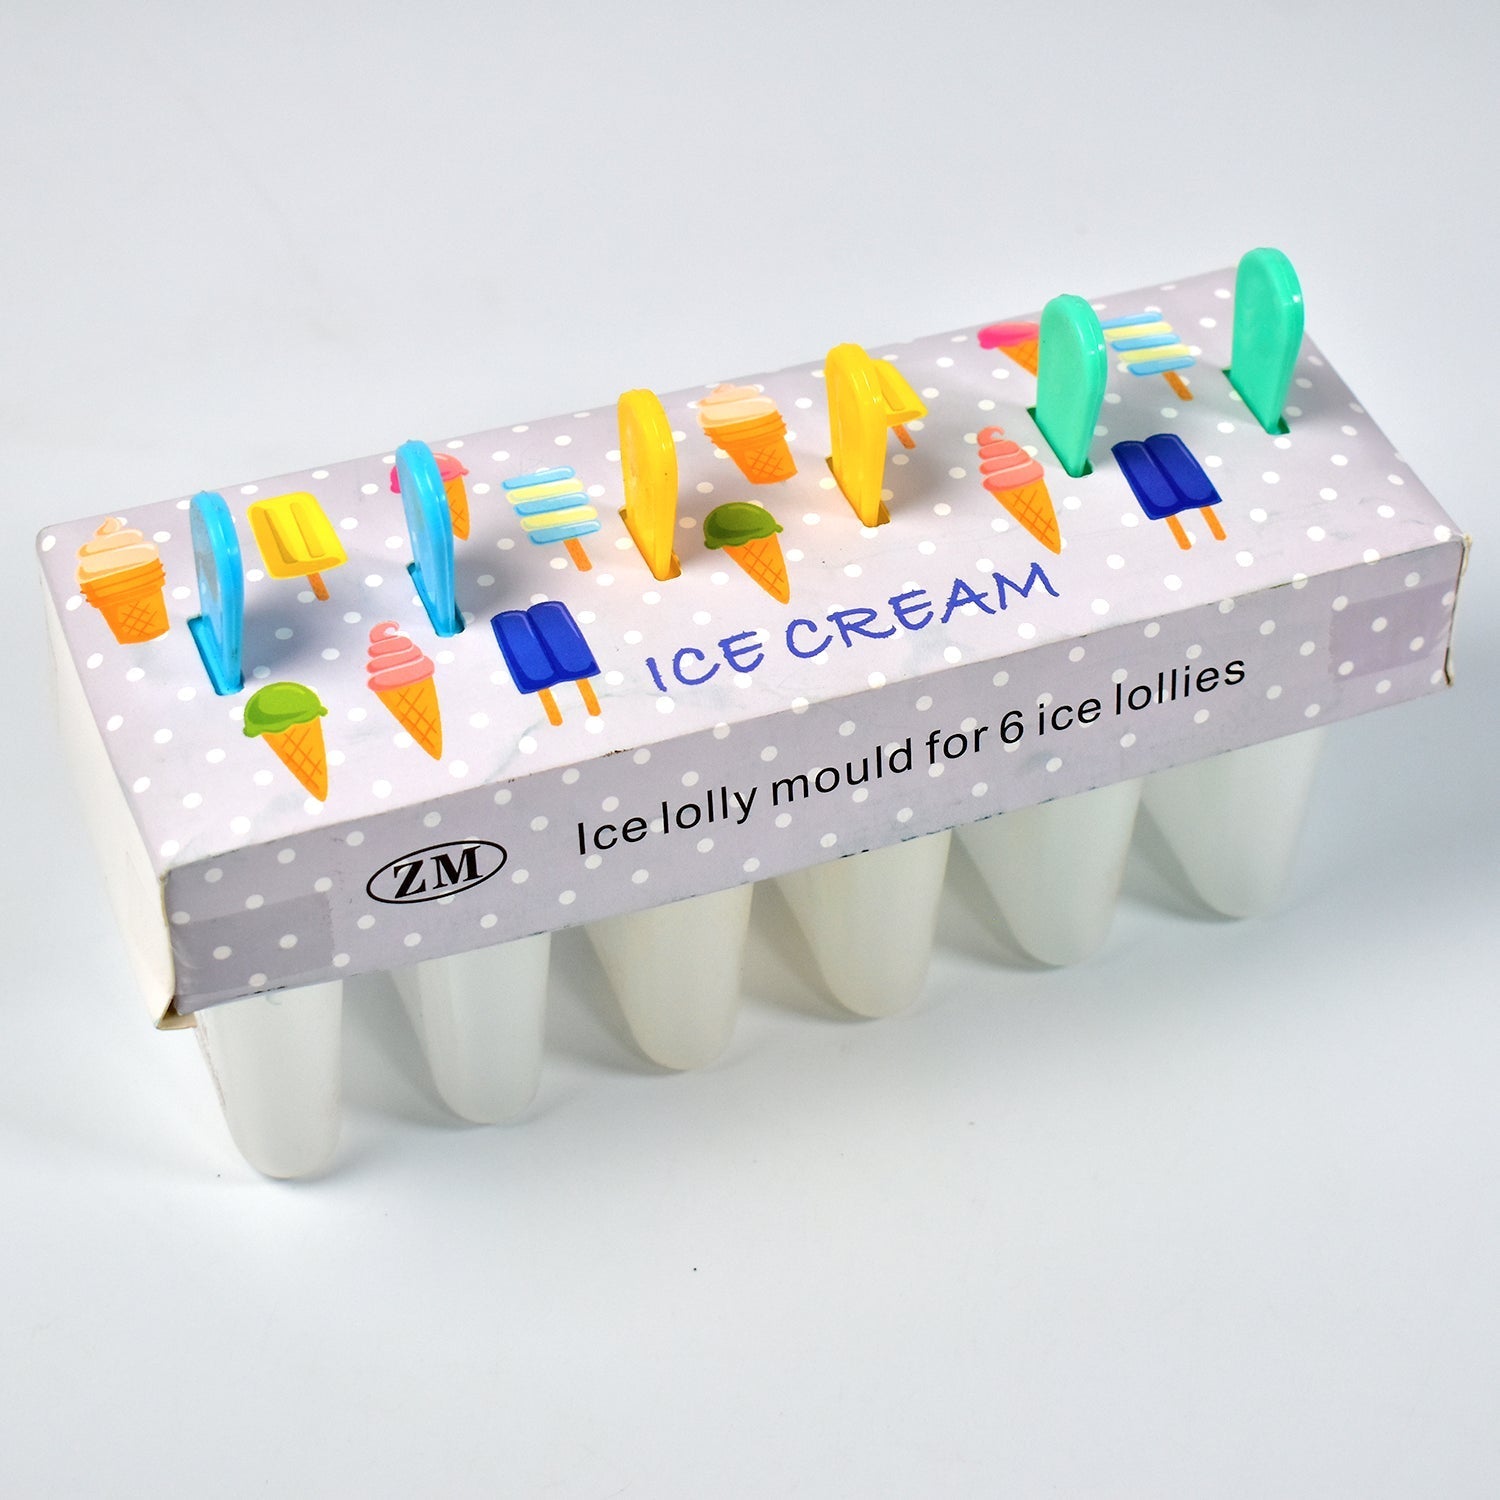 7167 Ice Candy Maker Upgrade Popsicle Molds Sets 6 Ice Pop Makers Reusable Ice Lolly Cream Mold Home-Made Popsicles Mould with Stick DeoDap